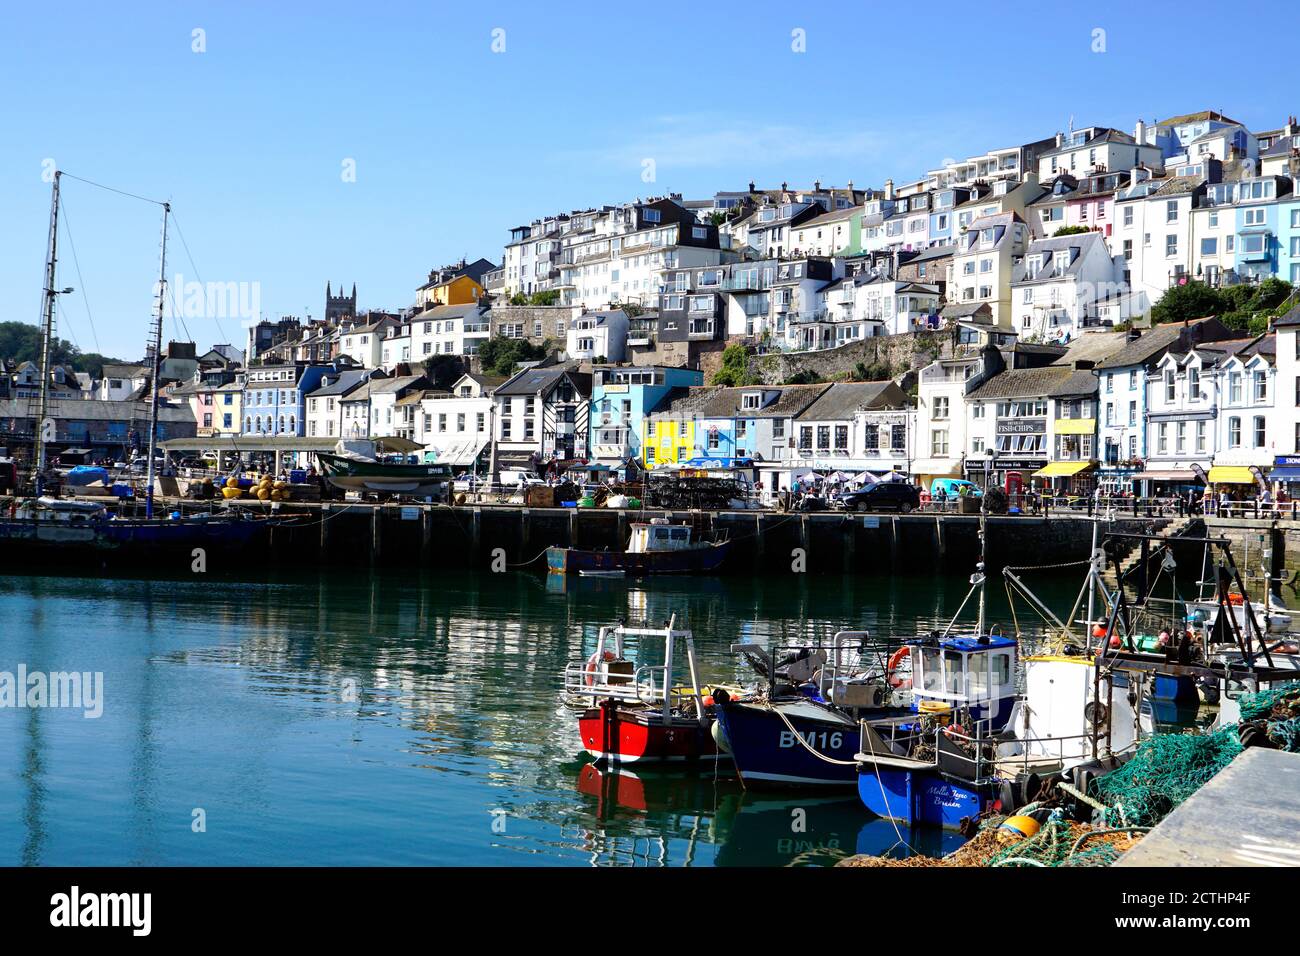 Brixham, Devon, UK. September 14, 2020. Beautiful architecture and quayside with fishing boats at moorings in the harbour at Brixham in Devon, UK. Stock Photo